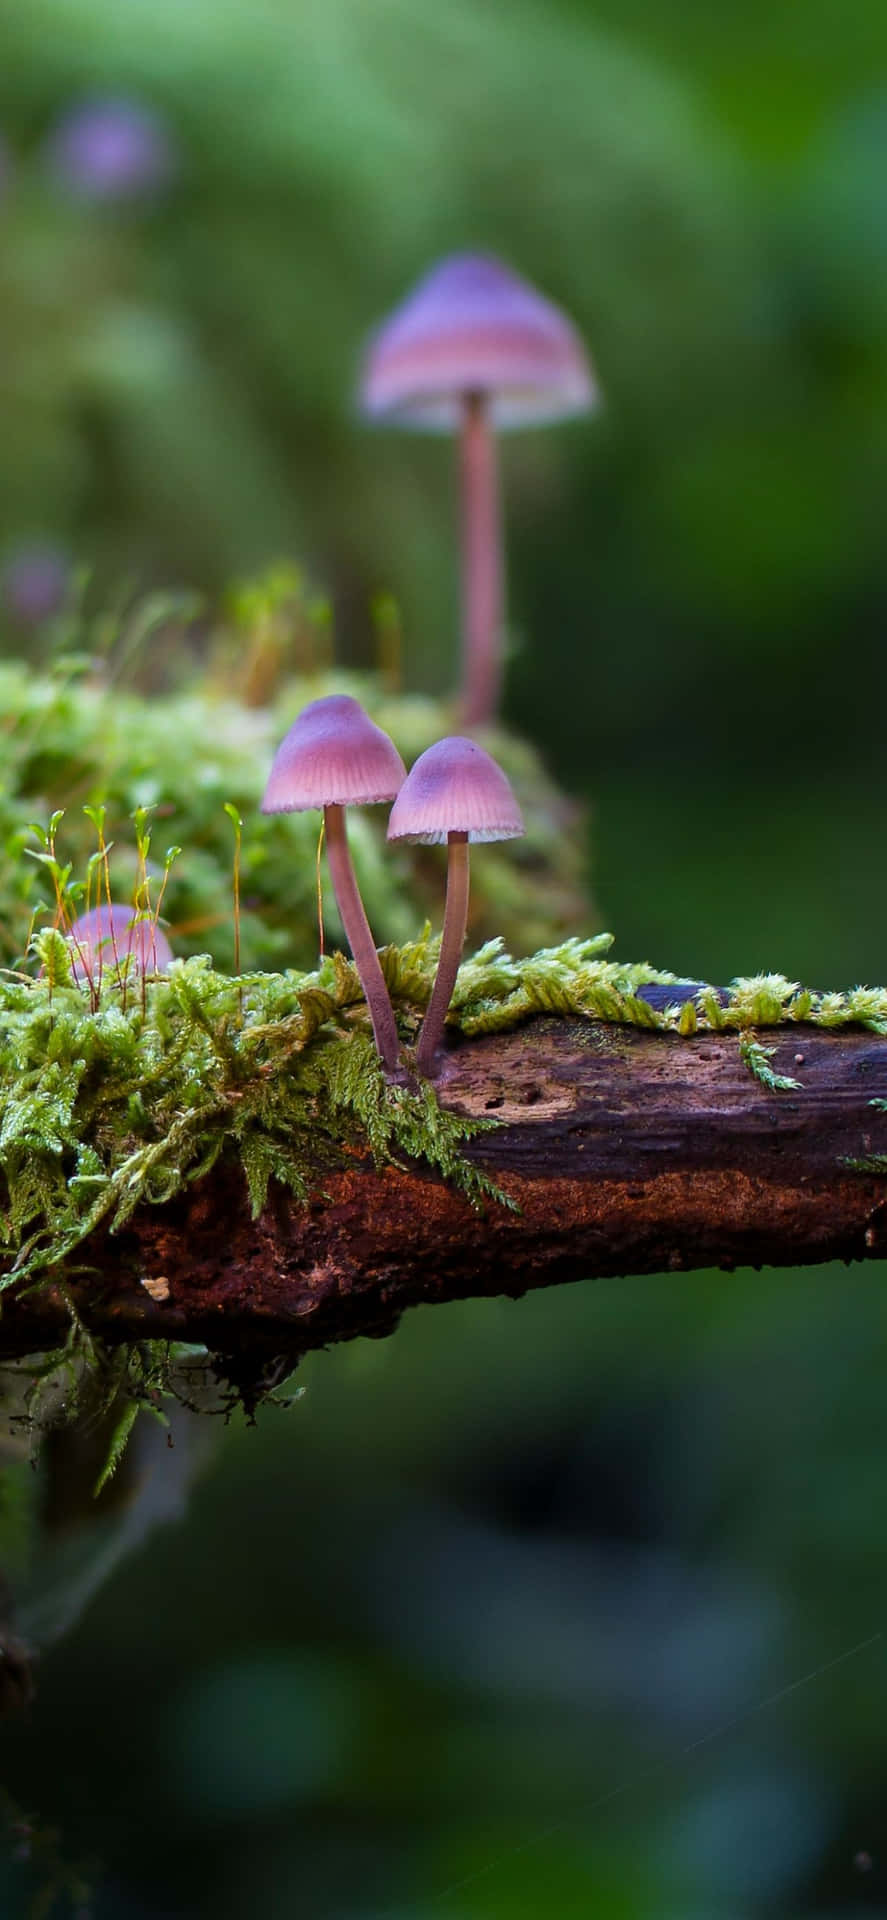 A Group Of Mushrooms On A Branch Wallpaper